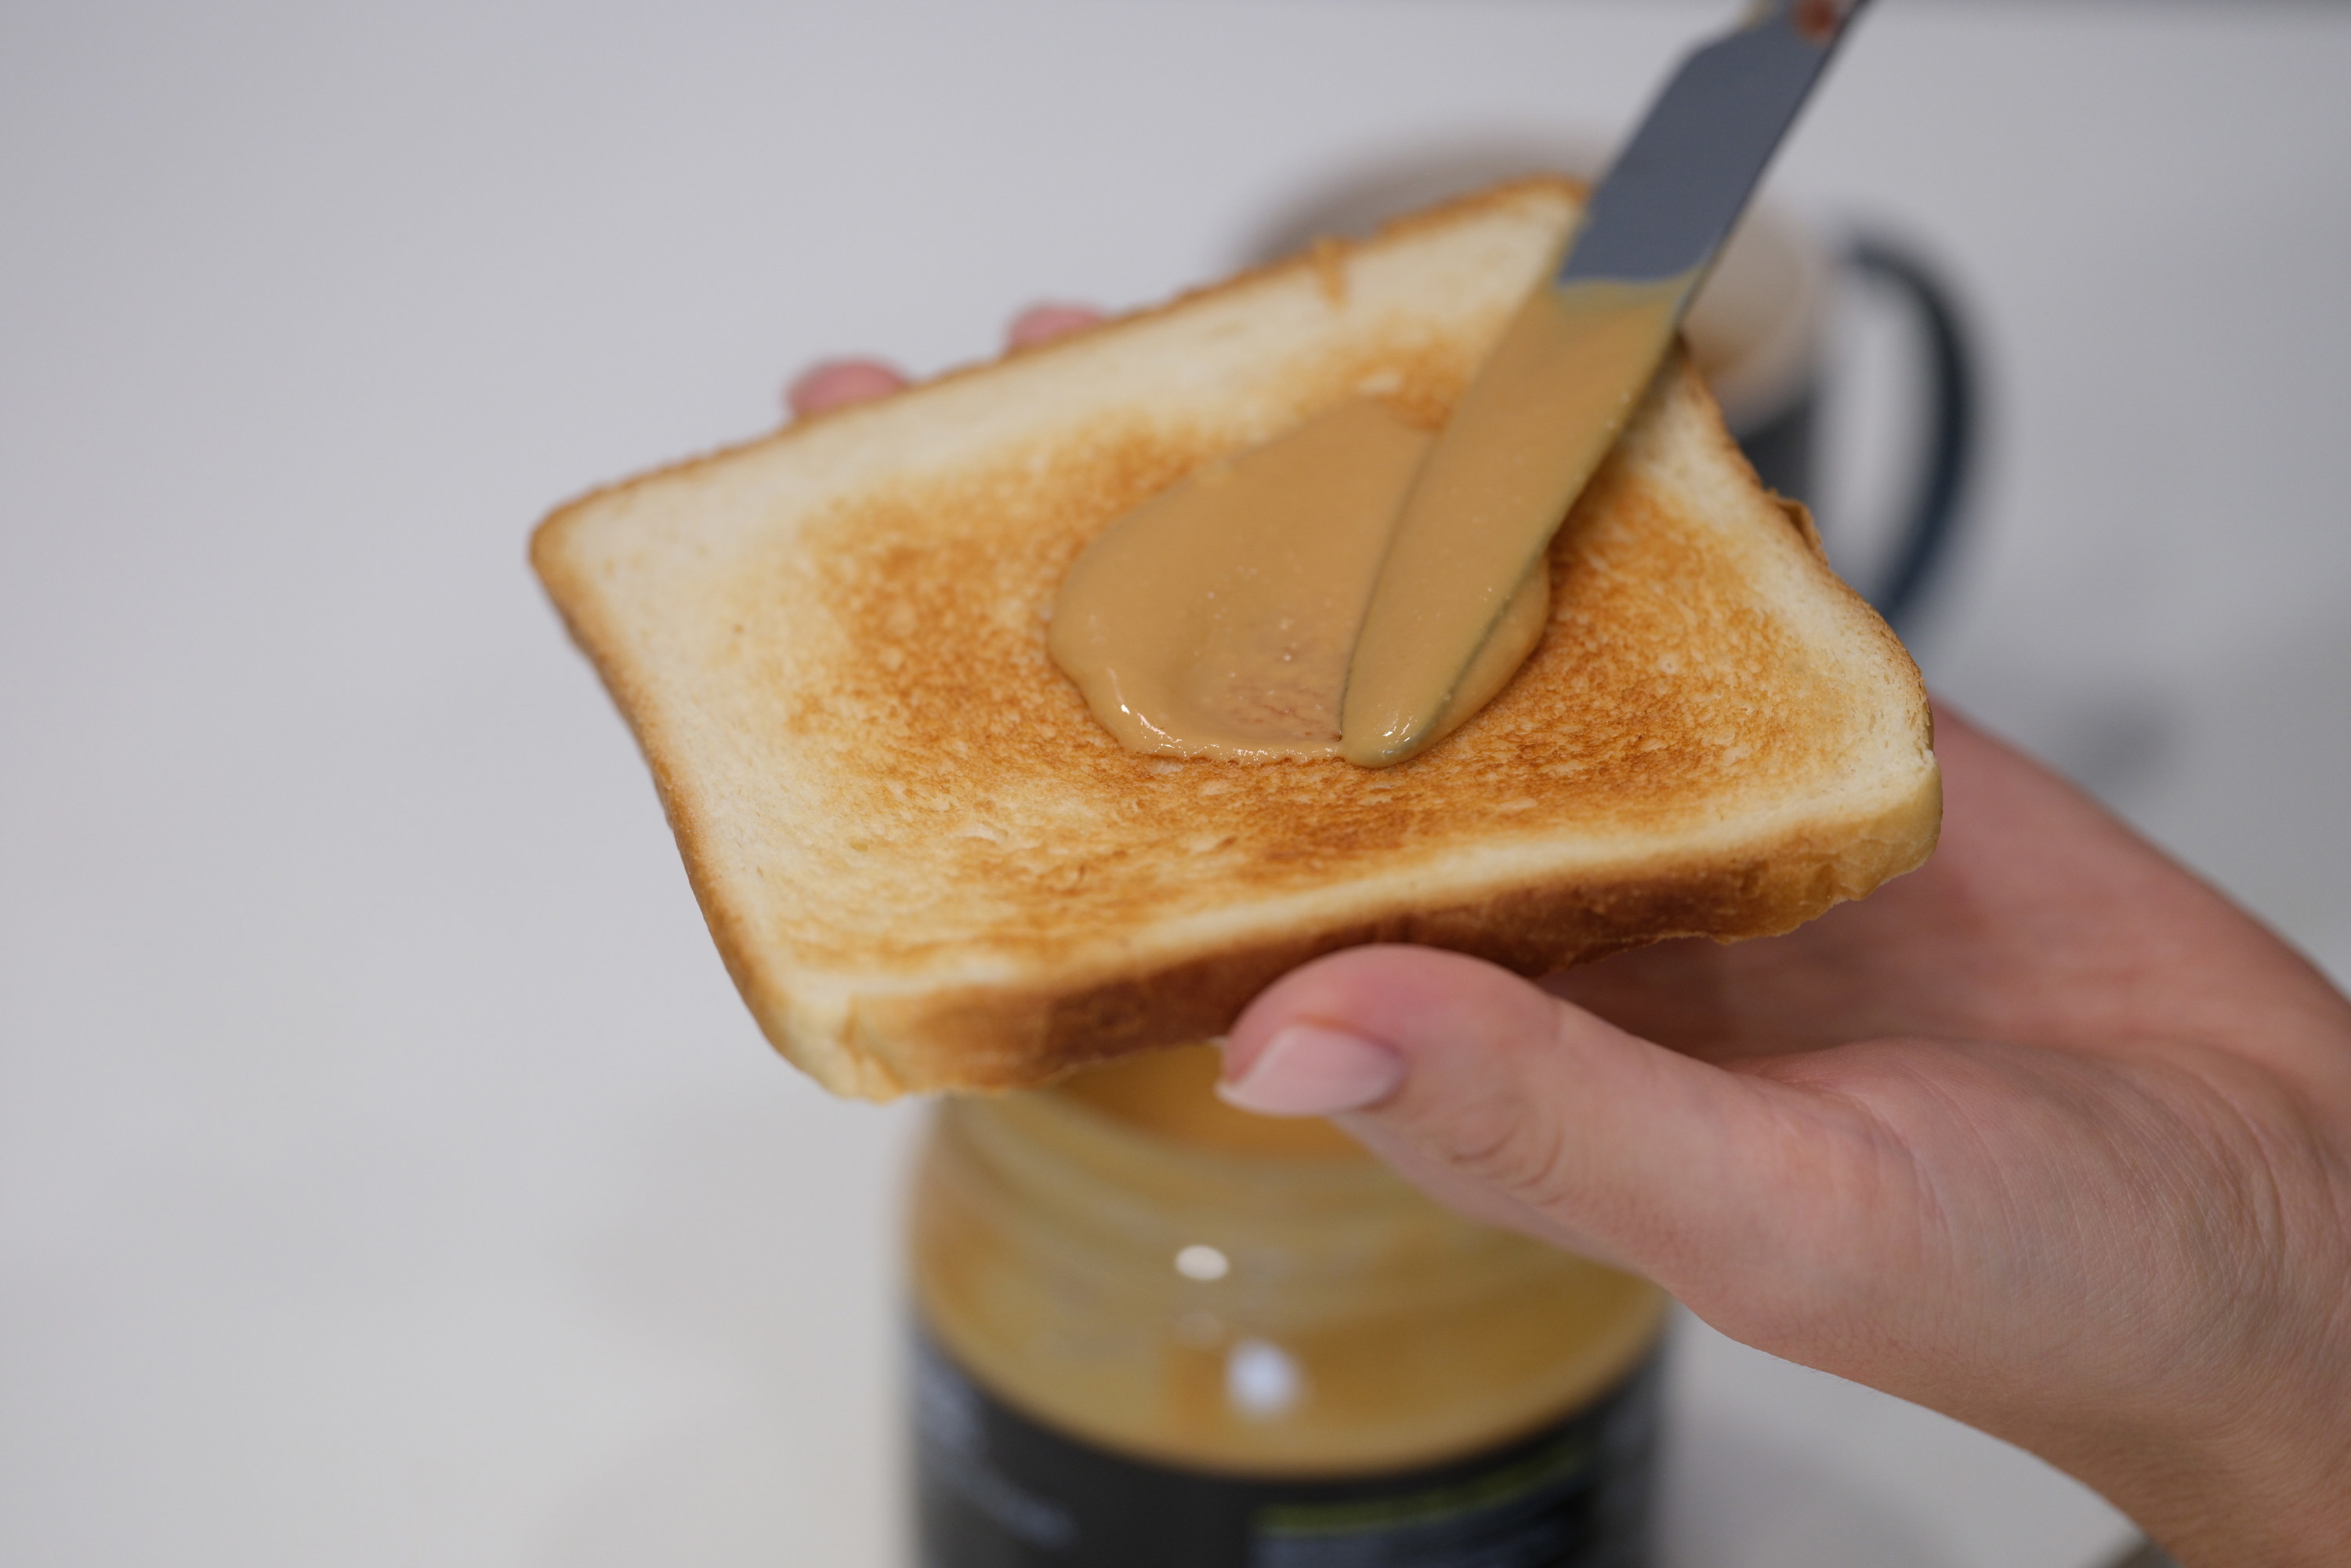 peanut butter being spread on a piece of toast